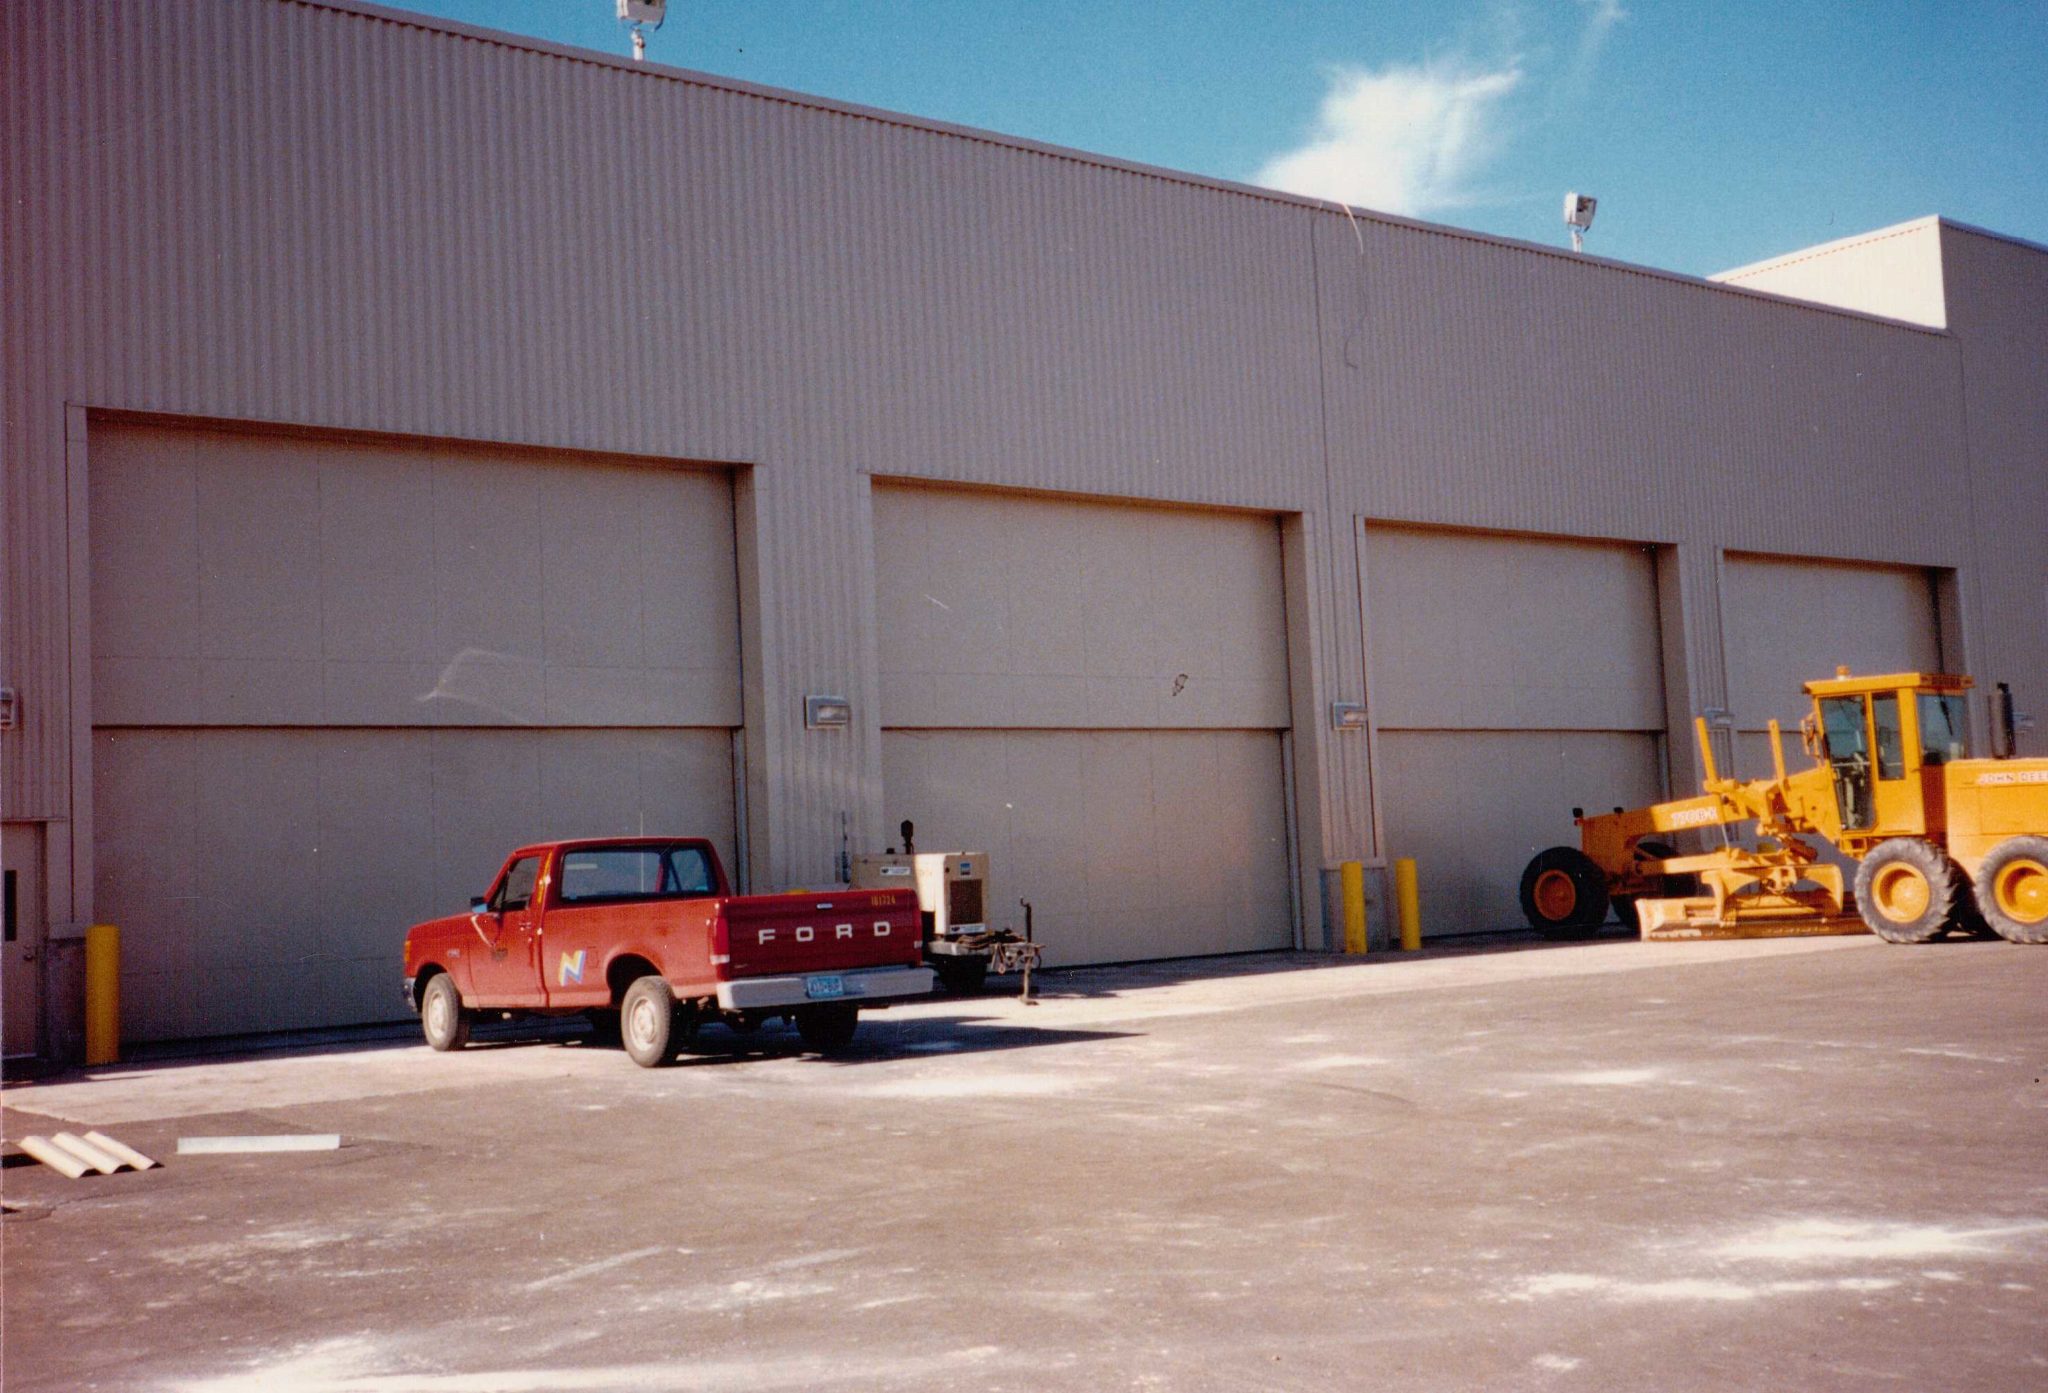 Vertical Lift Doors on the Sherburne Co. Generating Station in Becker, MN